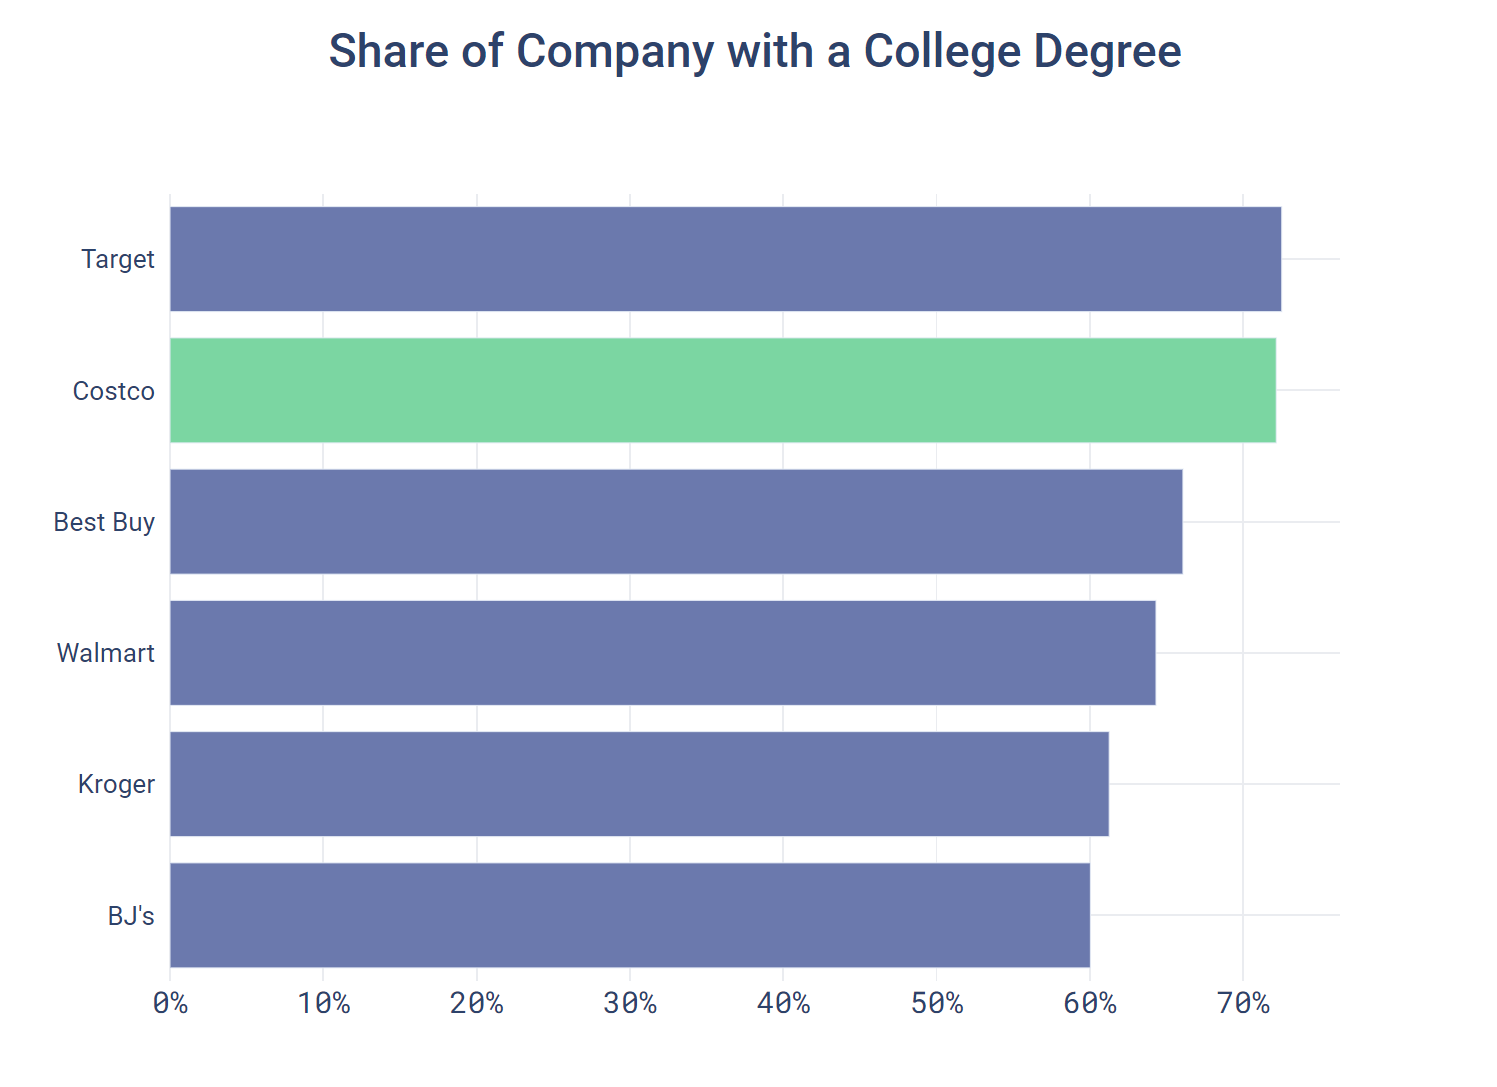 Share of Company with a College Degree